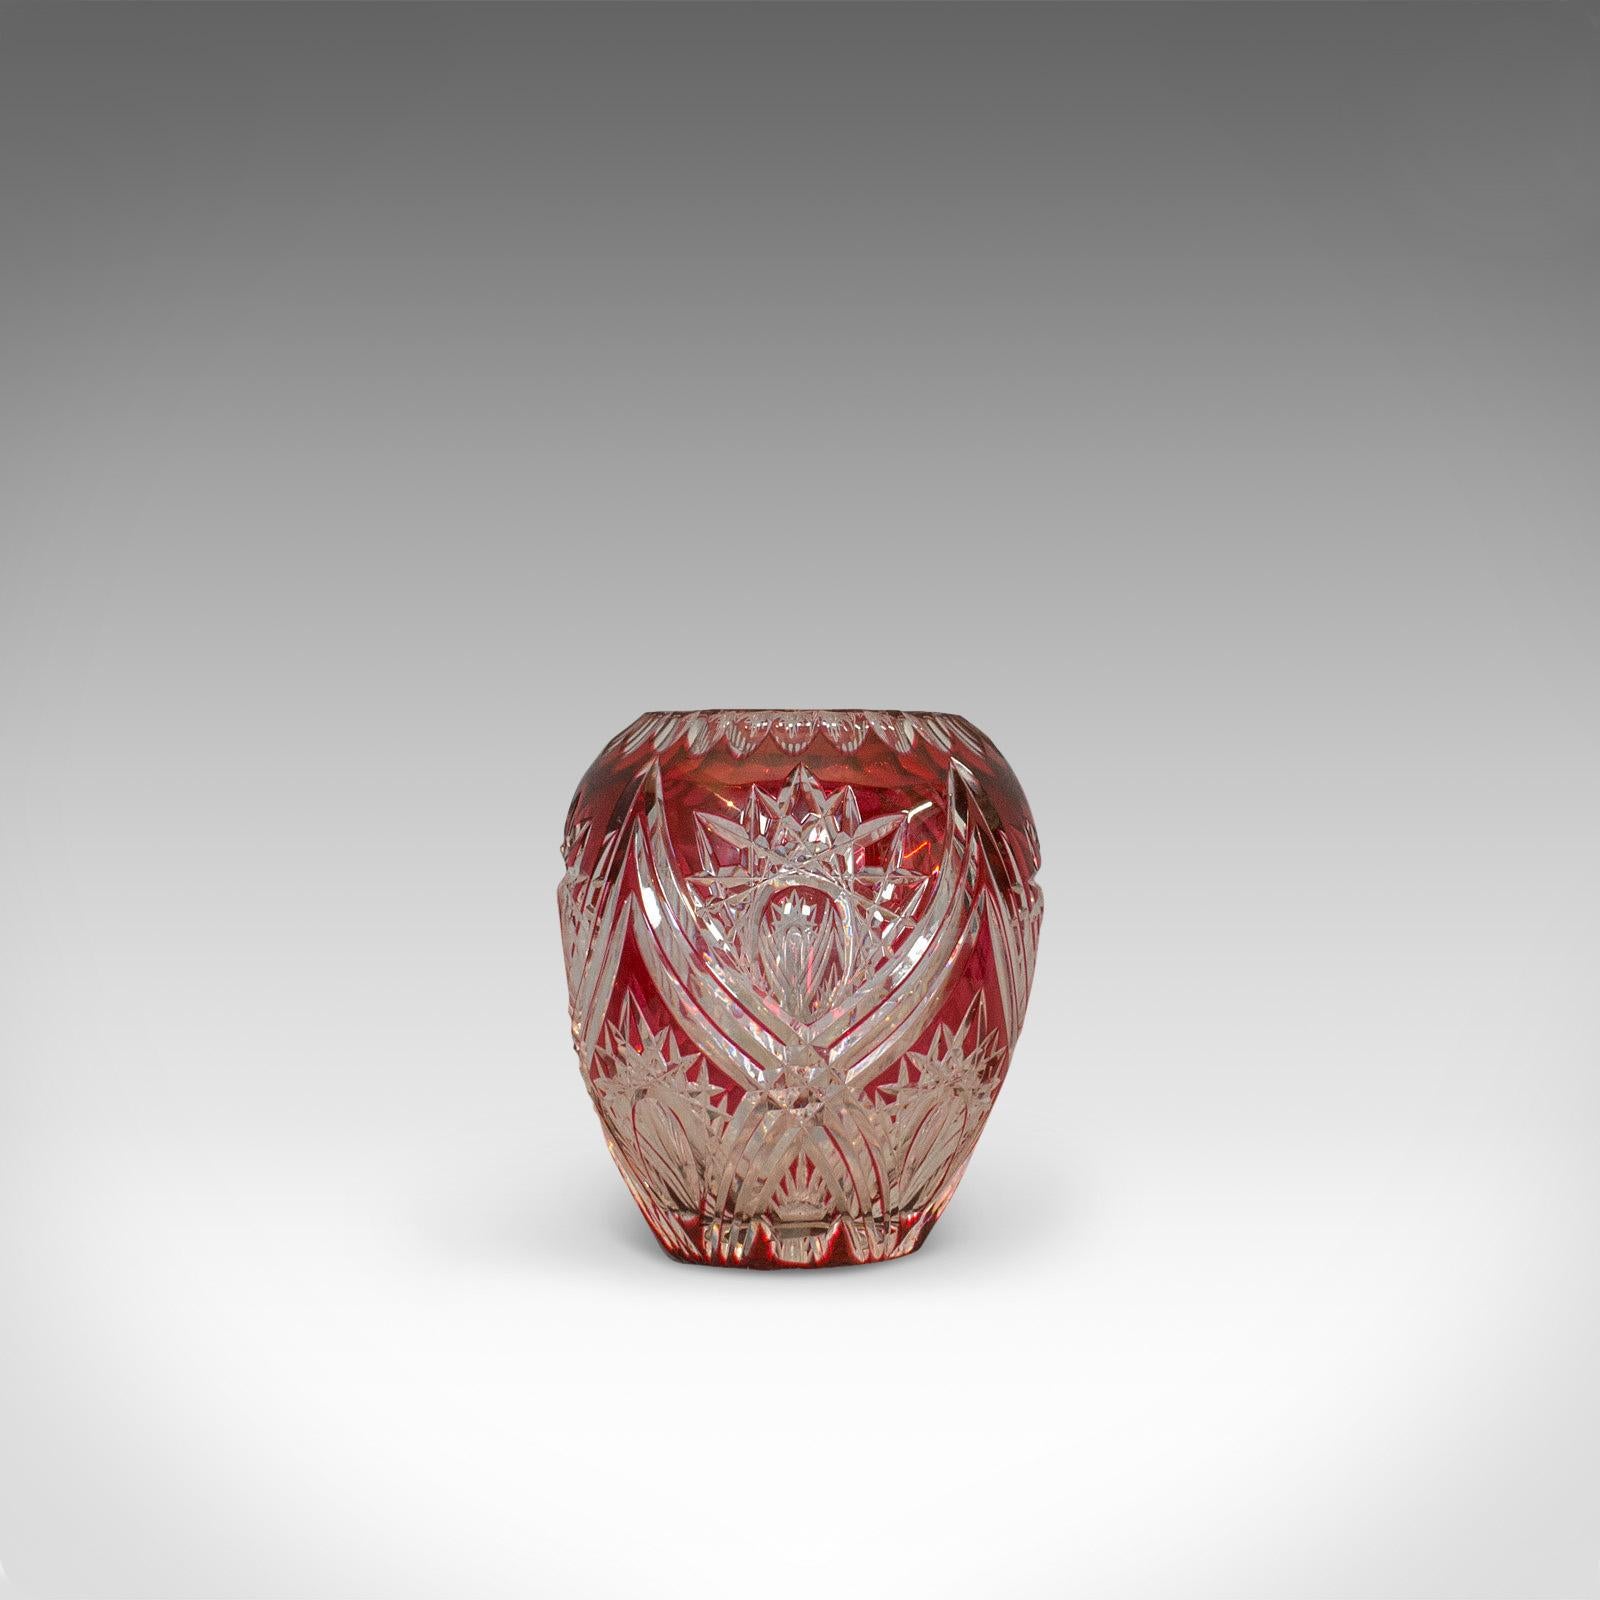 This is a vintage decorative vase. An English, cut glass vessel in rich cranberry color by Royal Brierley Crystal and dating to the mid-20th century, circa 1940.

Of sinuous form and with copious visual appeal
Cranberry hues with striking cut